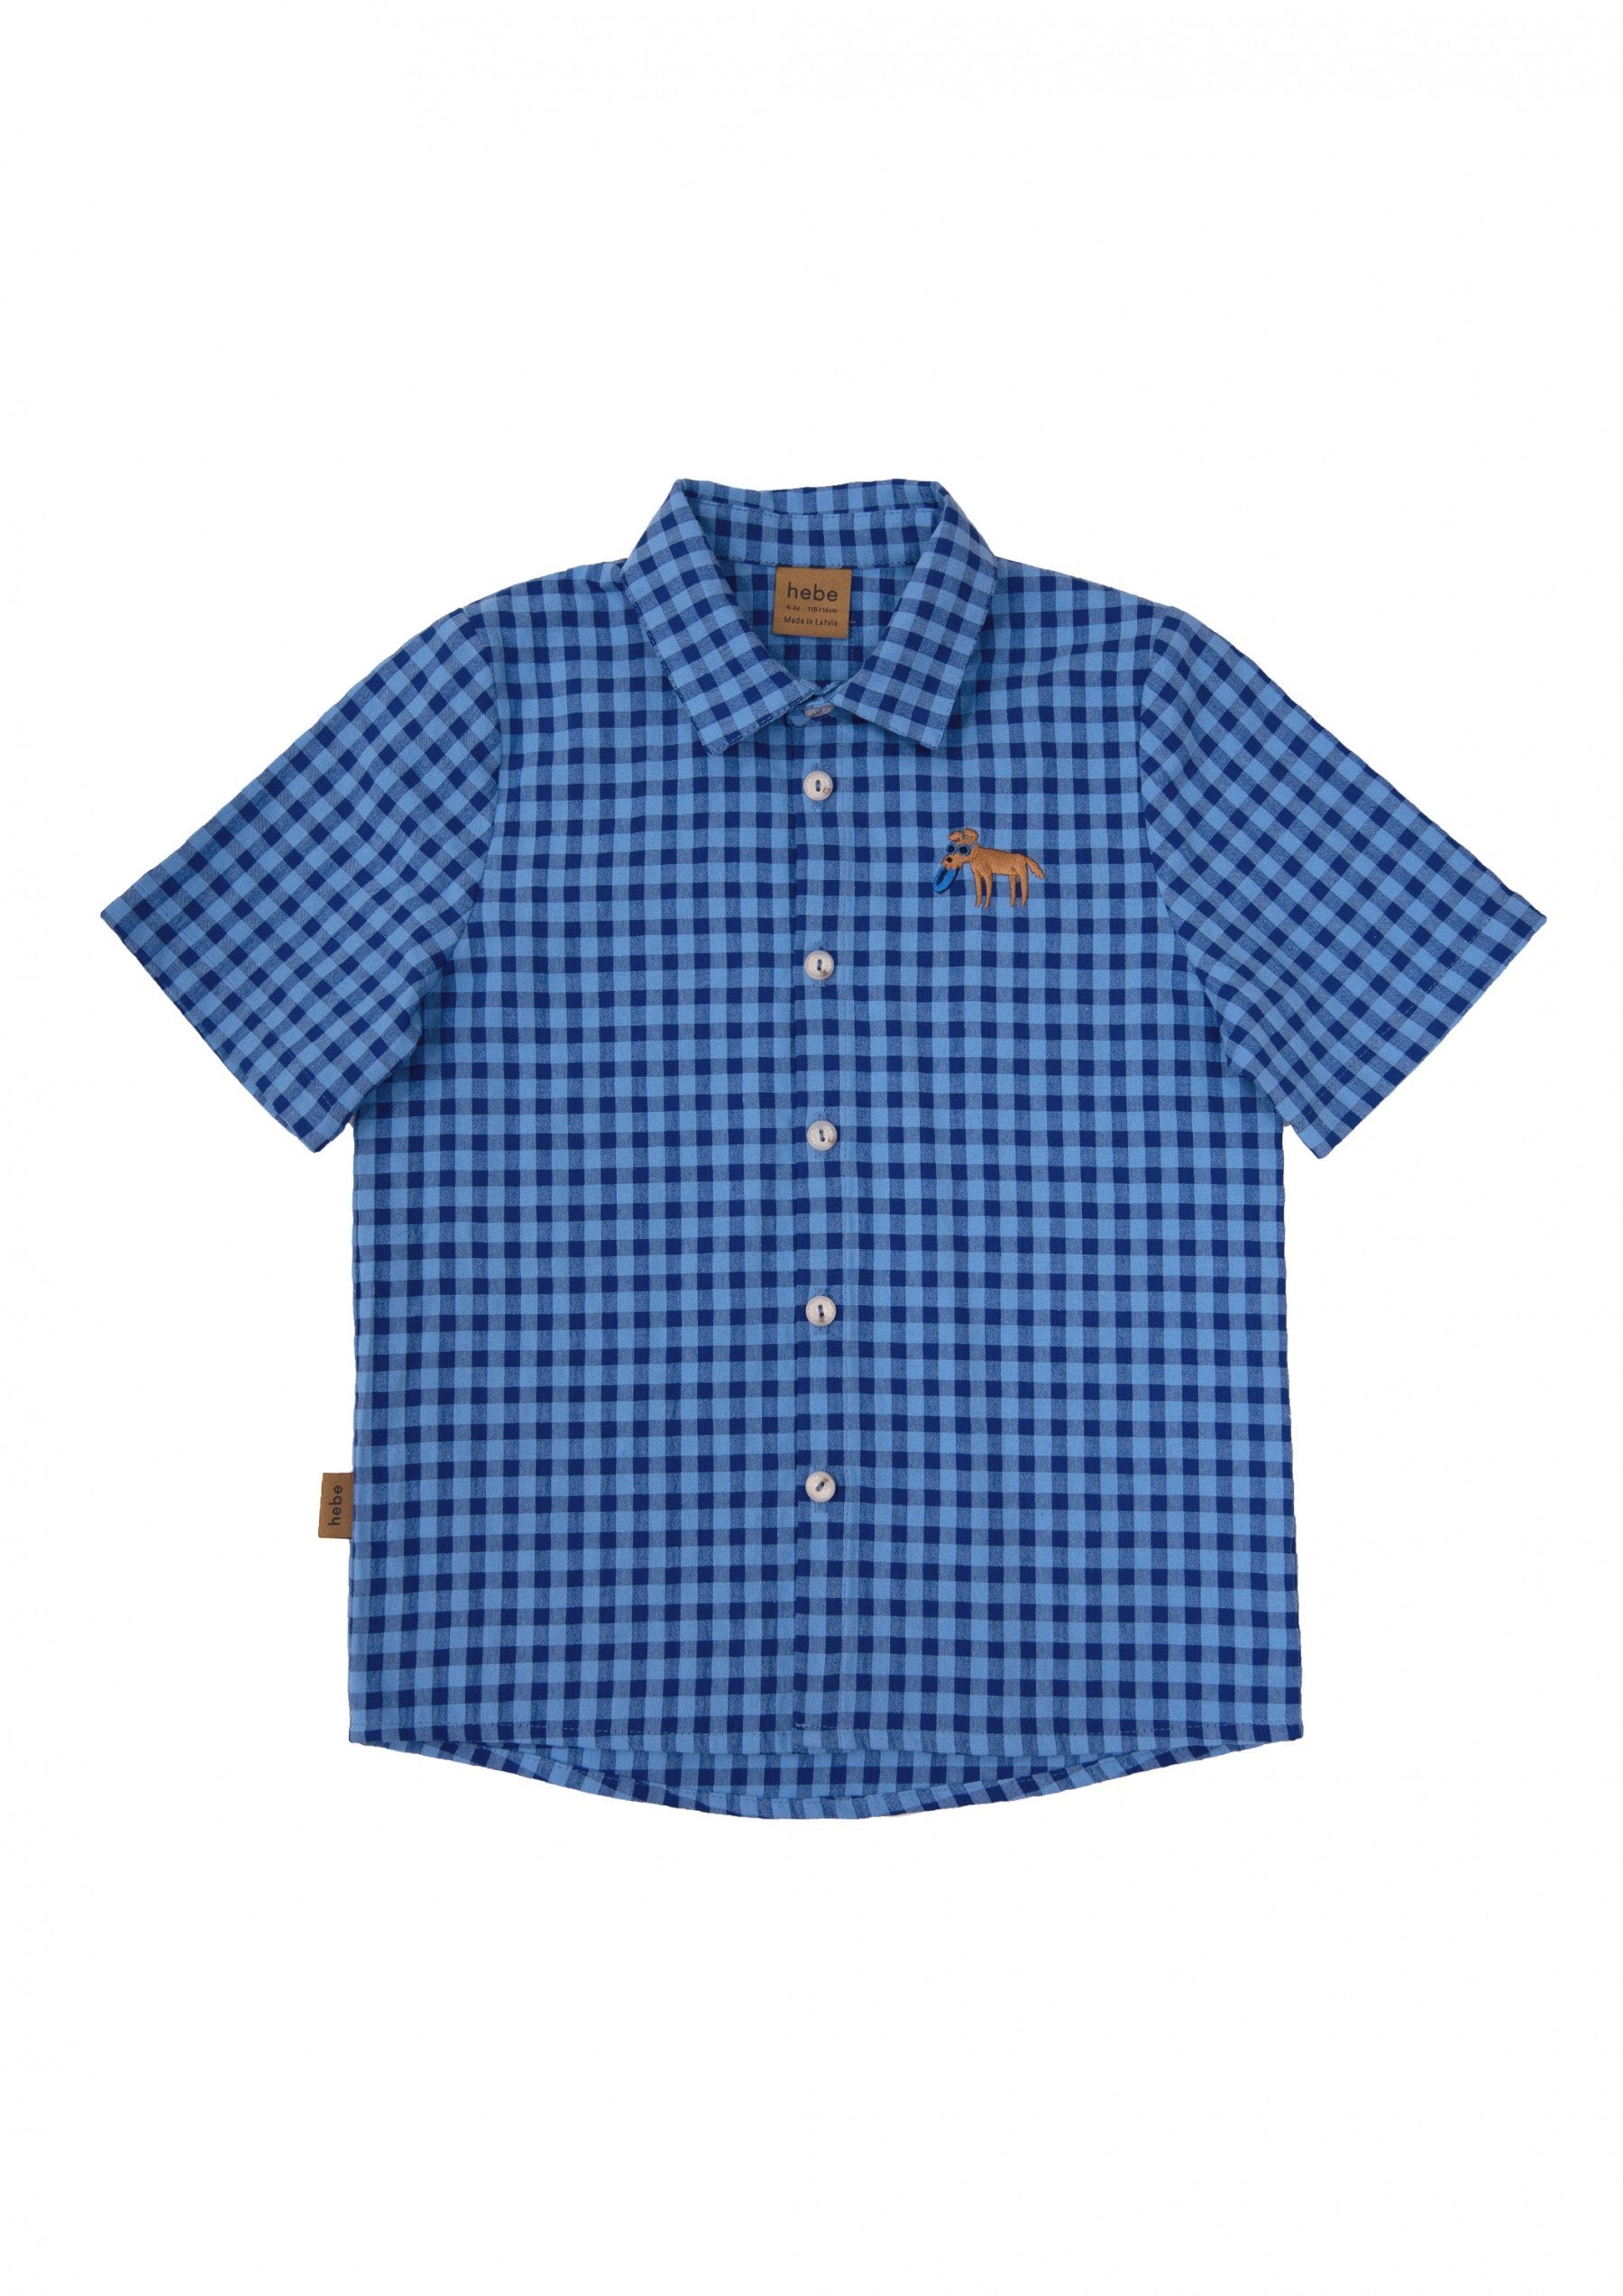 Hebe Shirt - Cotton with Blue Check and Embroidery